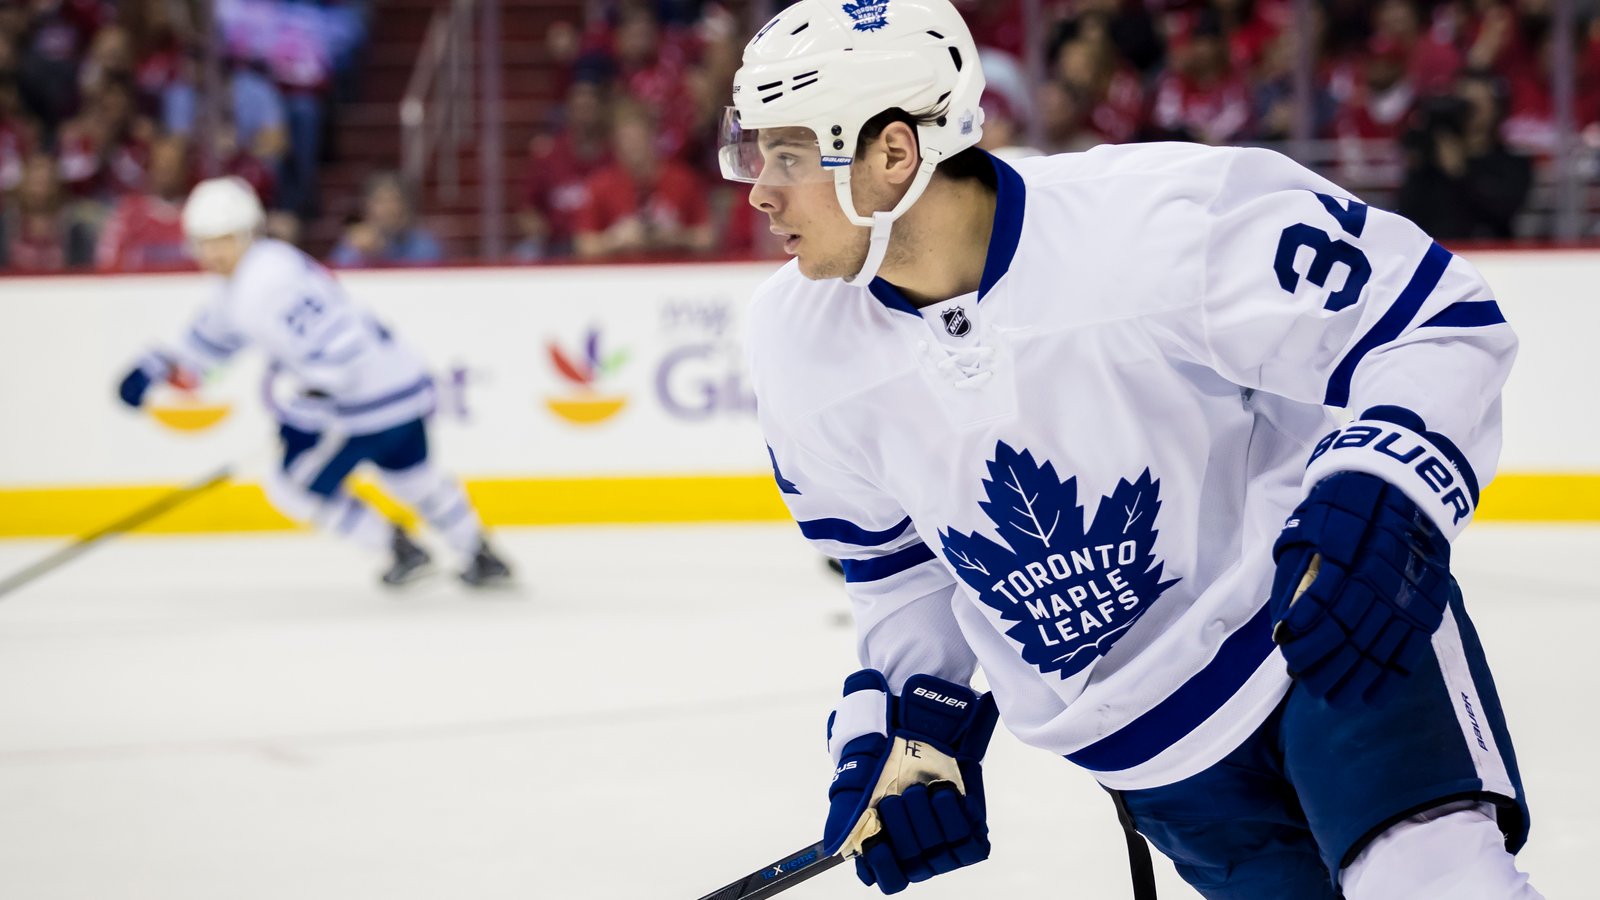 Your Call: How much should Auston Matthews get paid?